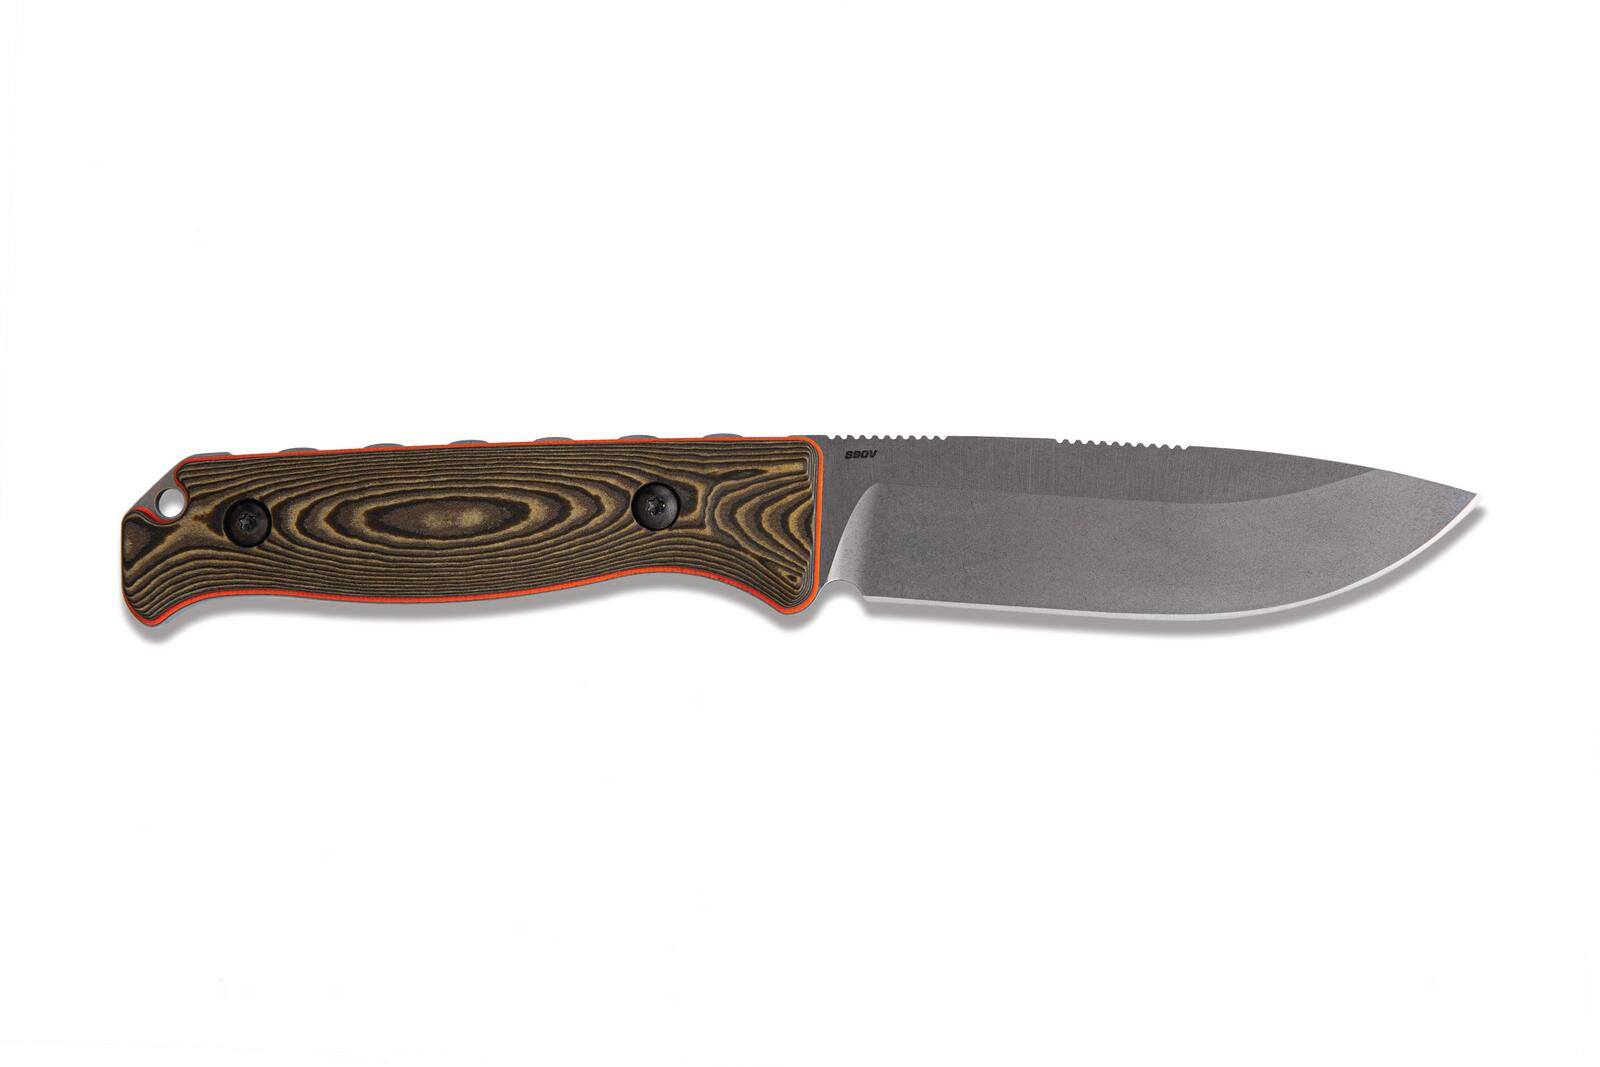 Benchmade 15002-1 Saddle Mountain Skinner Knife - Fixed Blade - Richlite Handle - Wander Outdoors